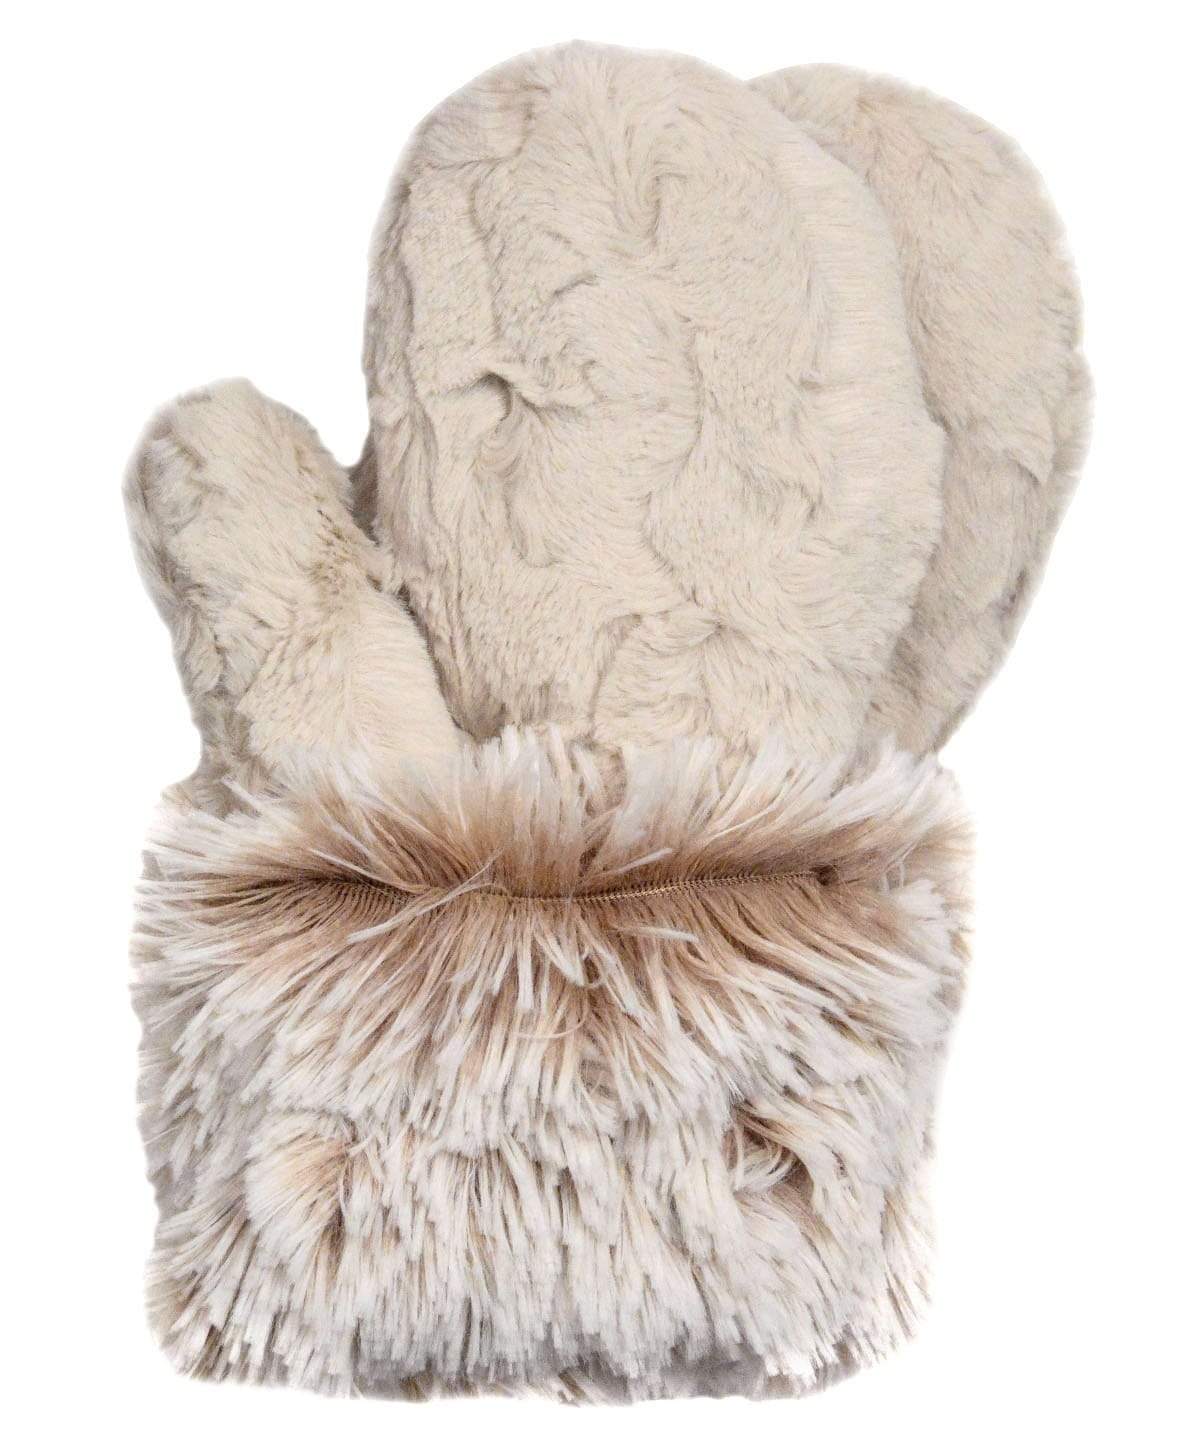 Women’s Product shot of Mittens. Gauntlets,  Mitts | Cuddly Sand with Foxy Beach Cuff in Faux Fur | Handmade by Pandemonium Millinery Seattle, WA USA